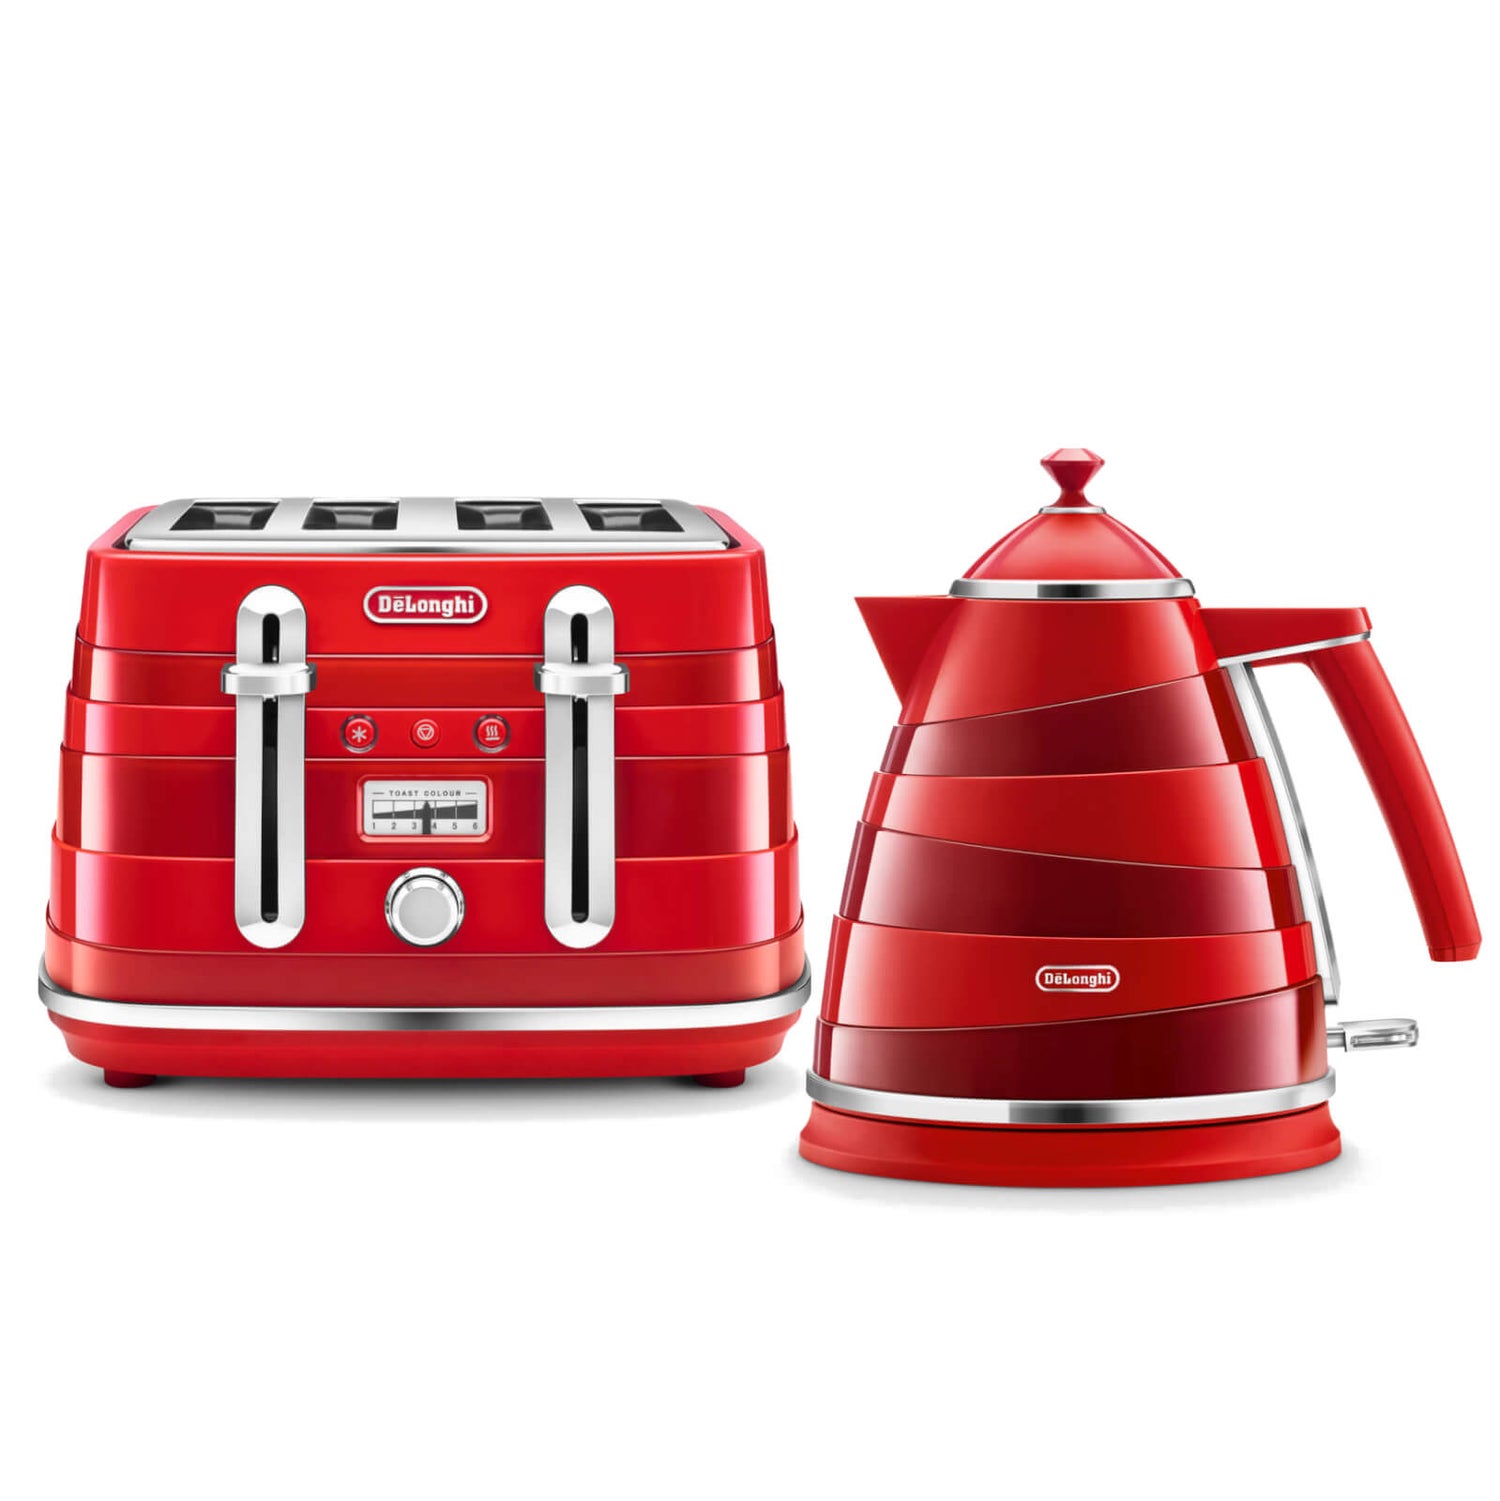 Our stylish red Delonghi kettle and toaster will brighten any